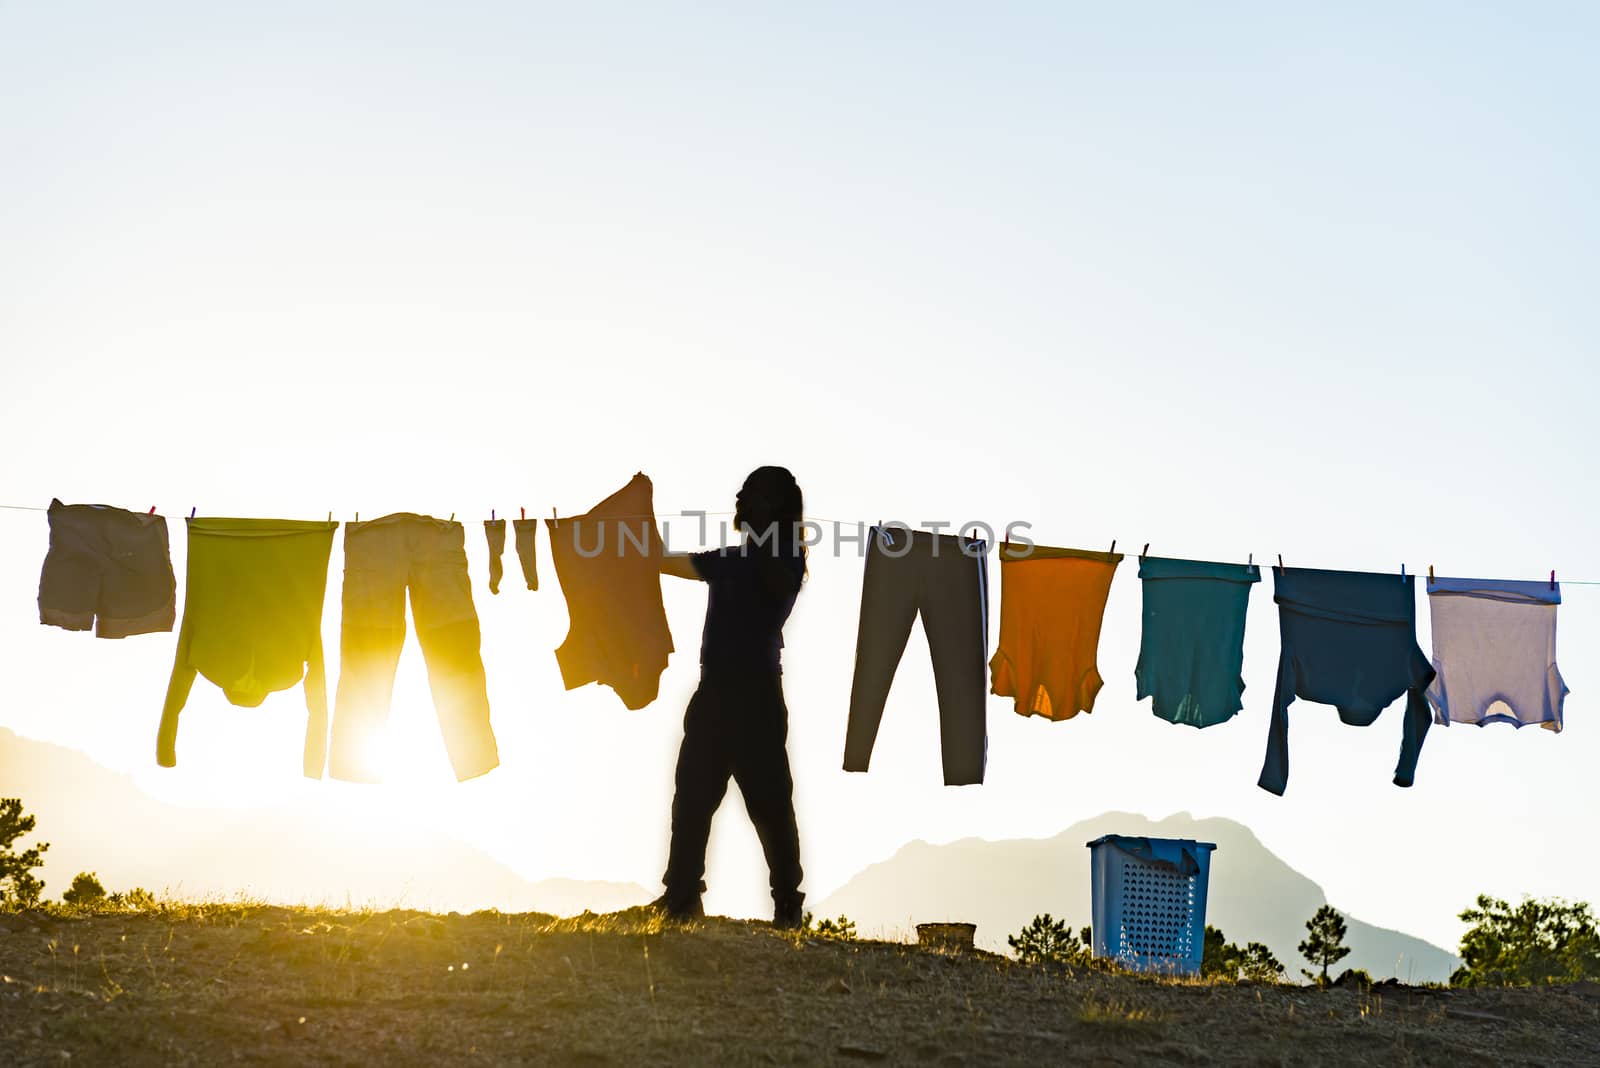 Clothes, laundry and working man